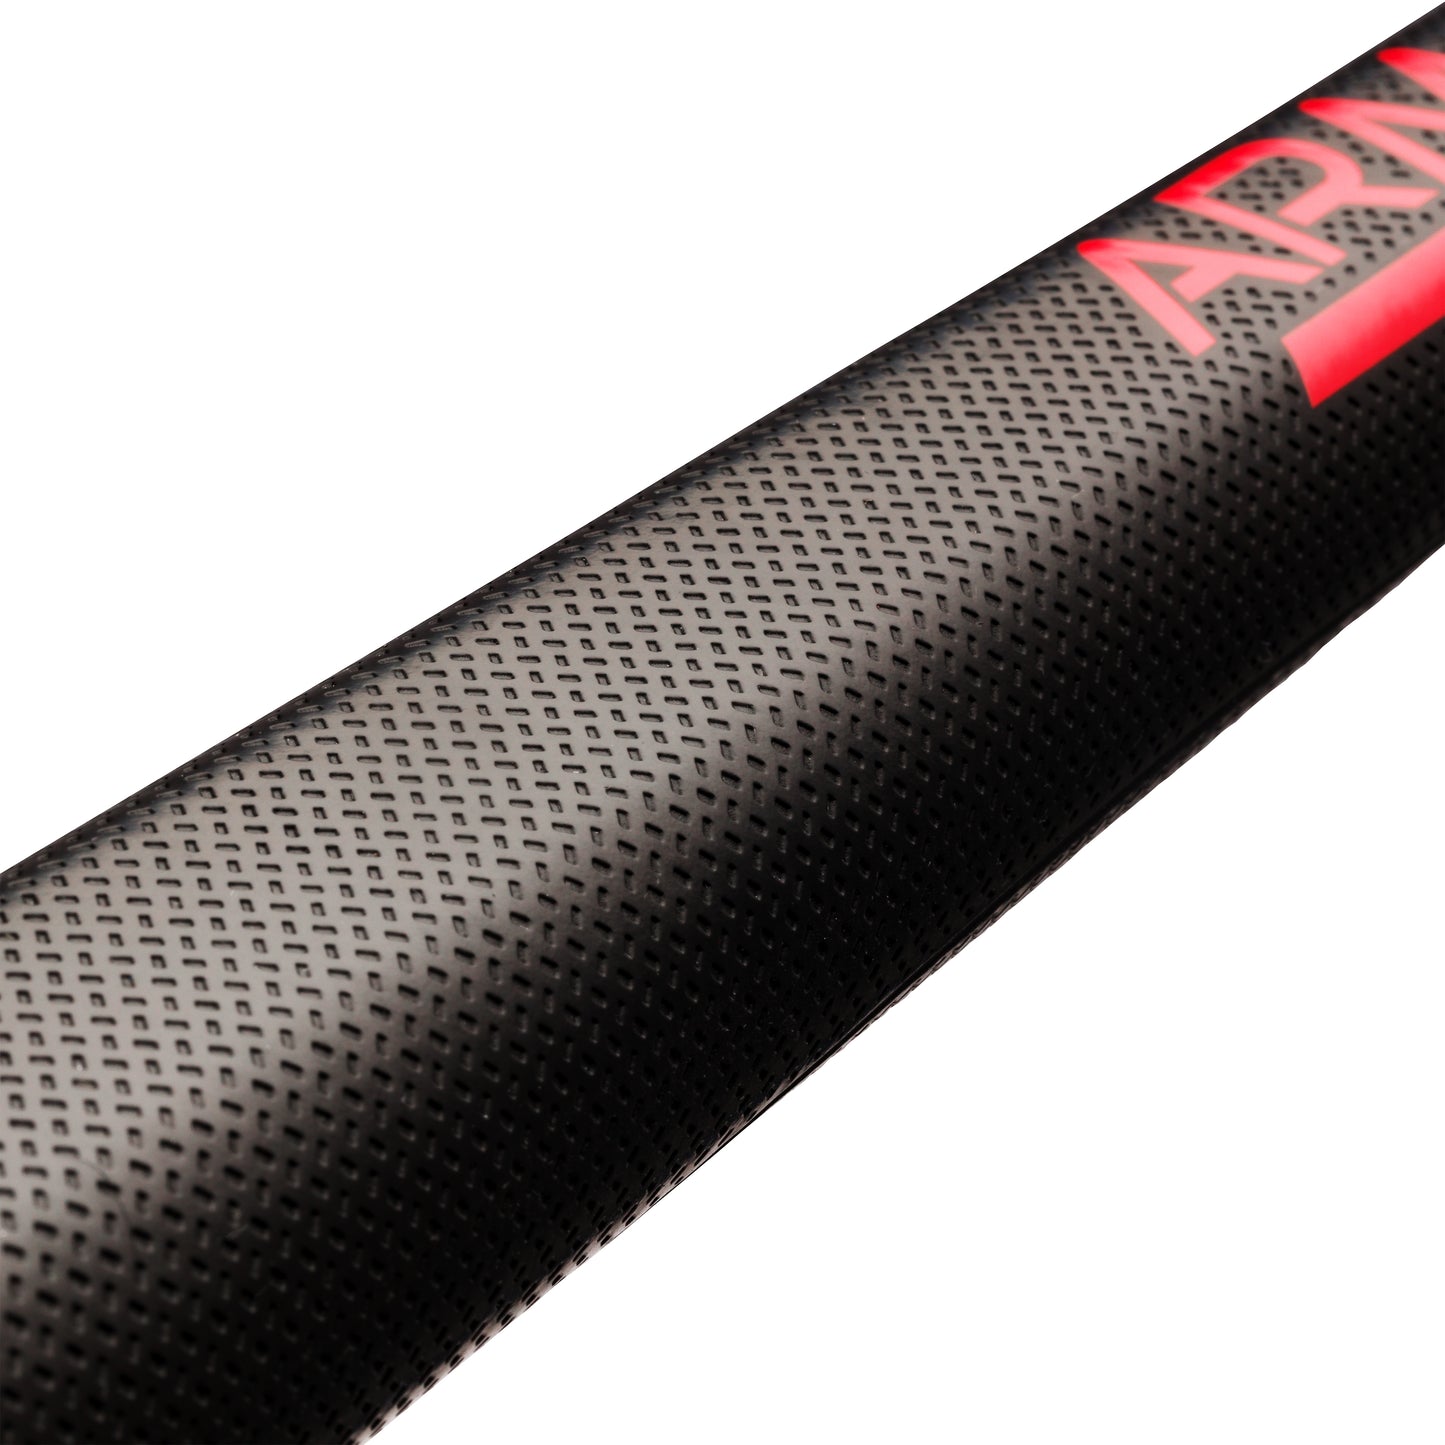 Arm Lock 17'' AL2 Converter Grip - now in Red and Black